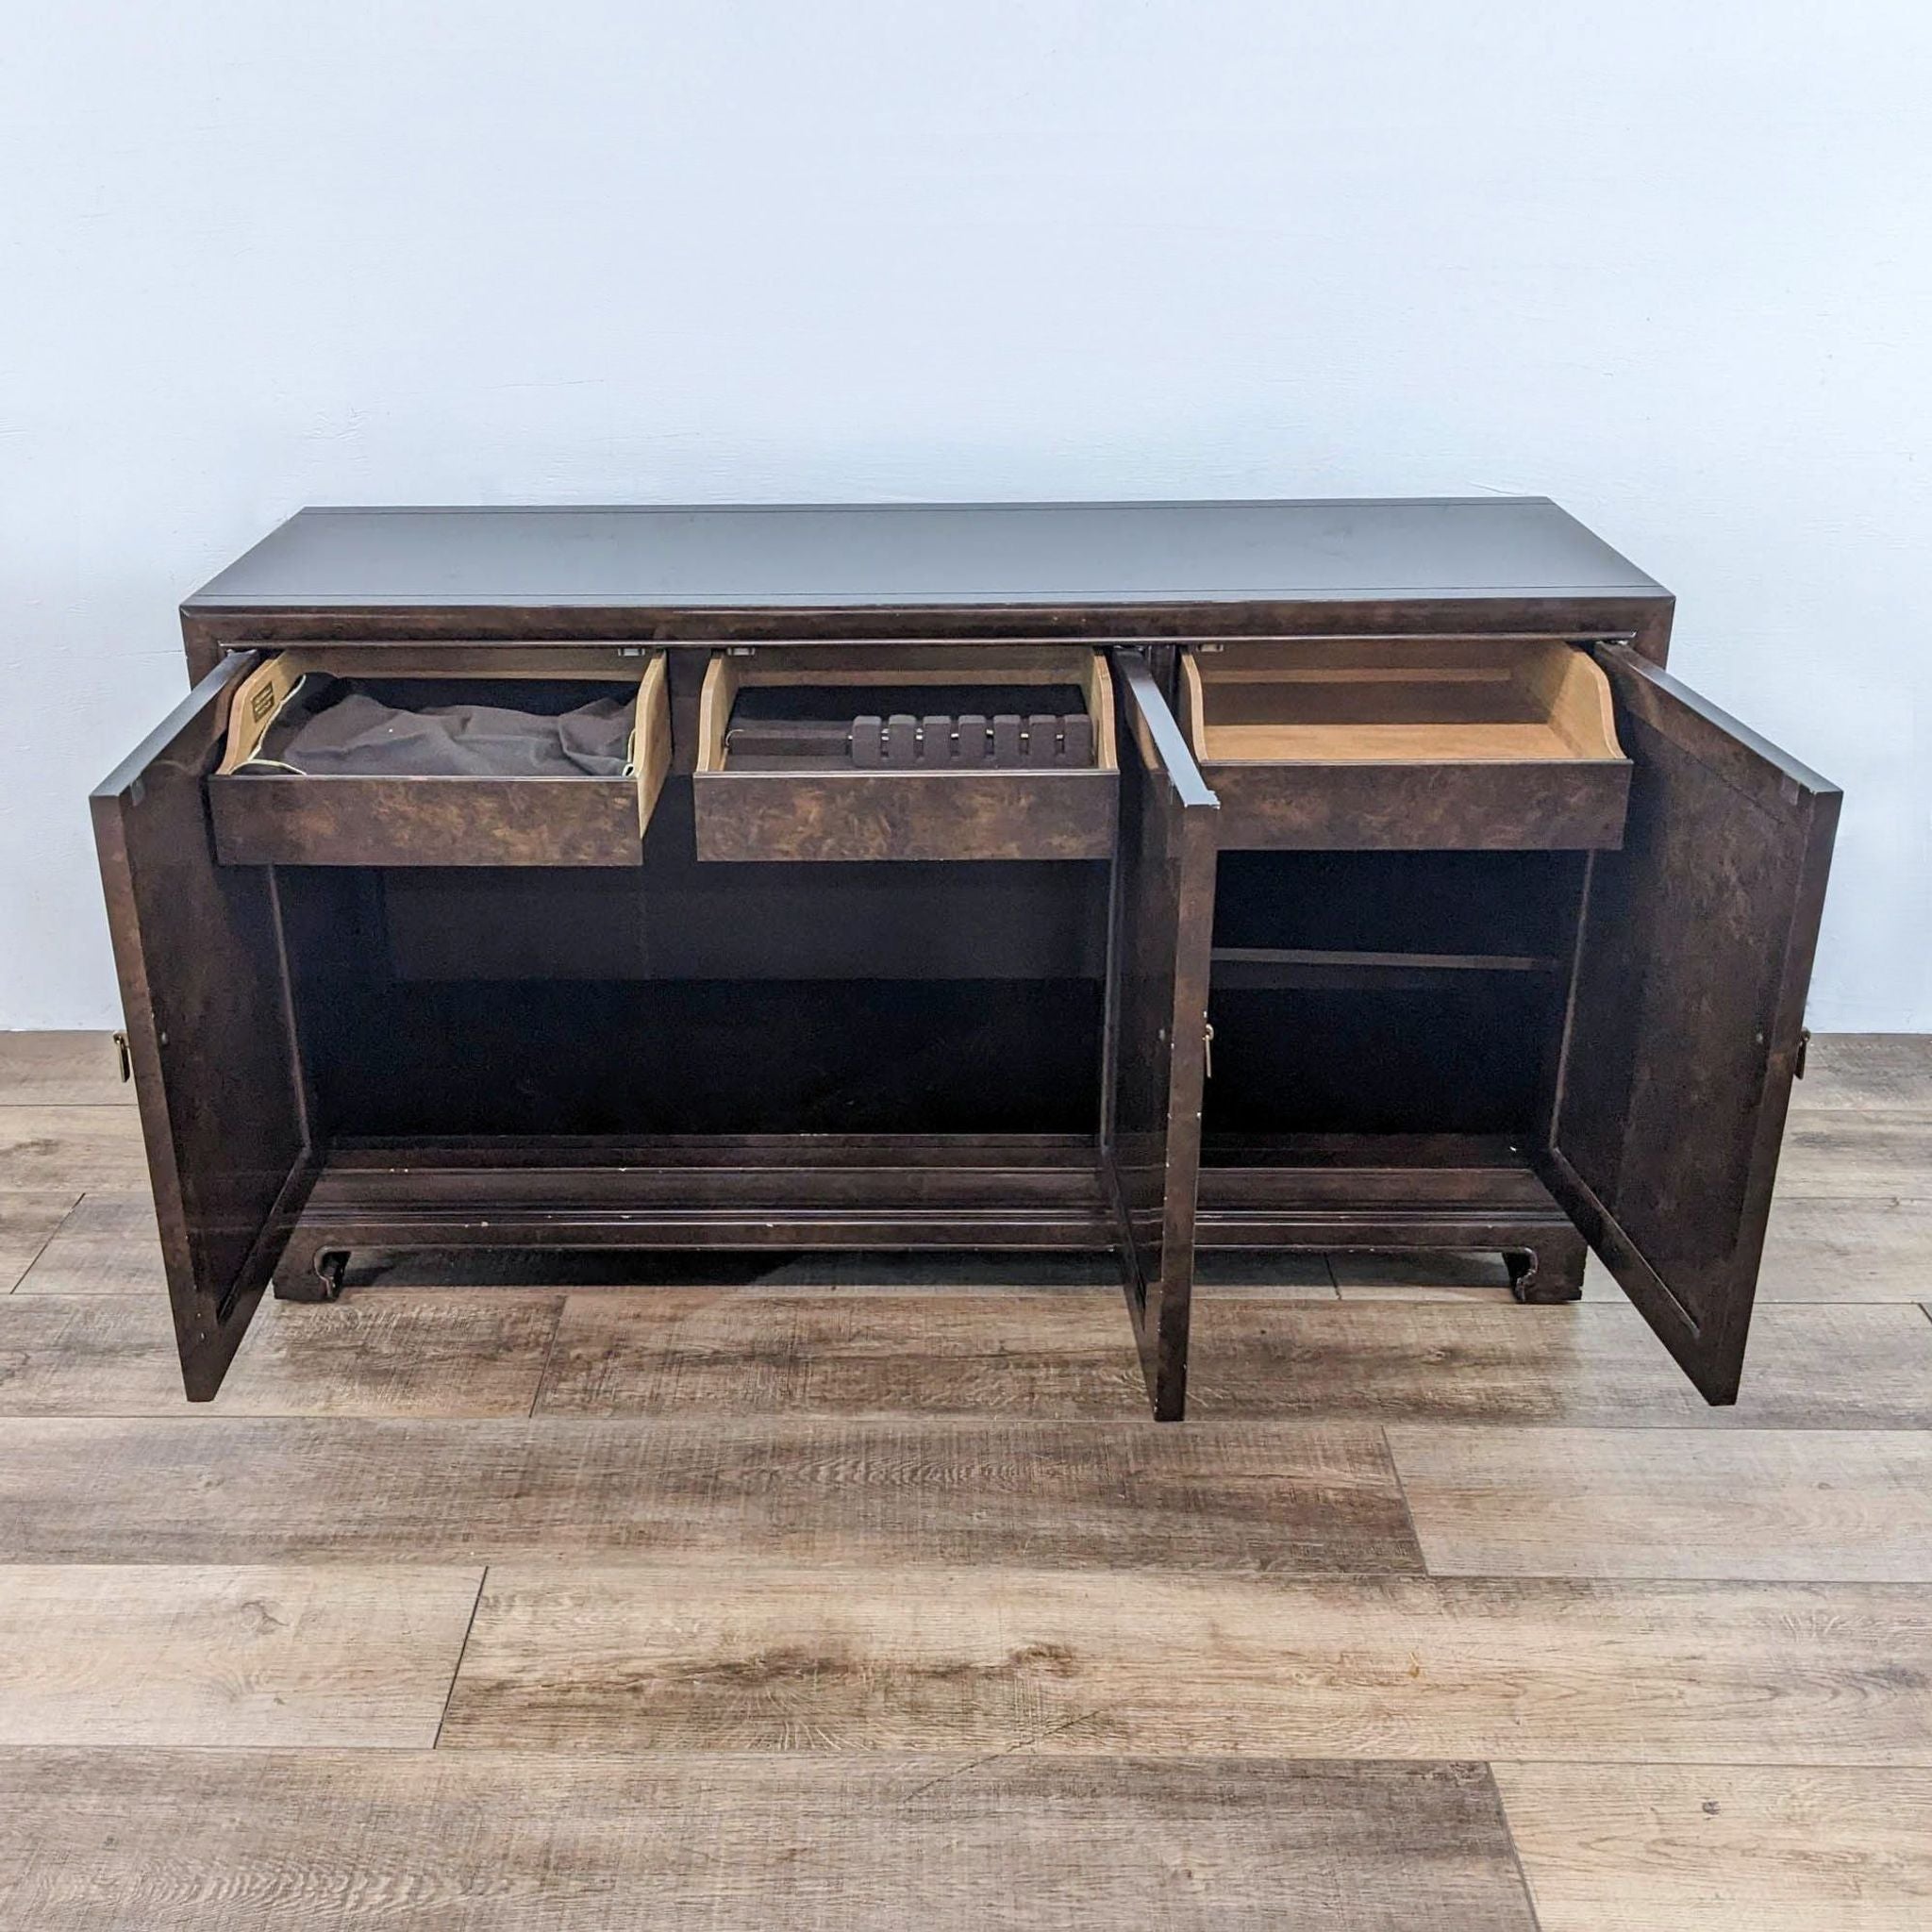 Alt text 2: Open John Widdicomb credenza showing compartments and drawers, with the brand label visible inside.